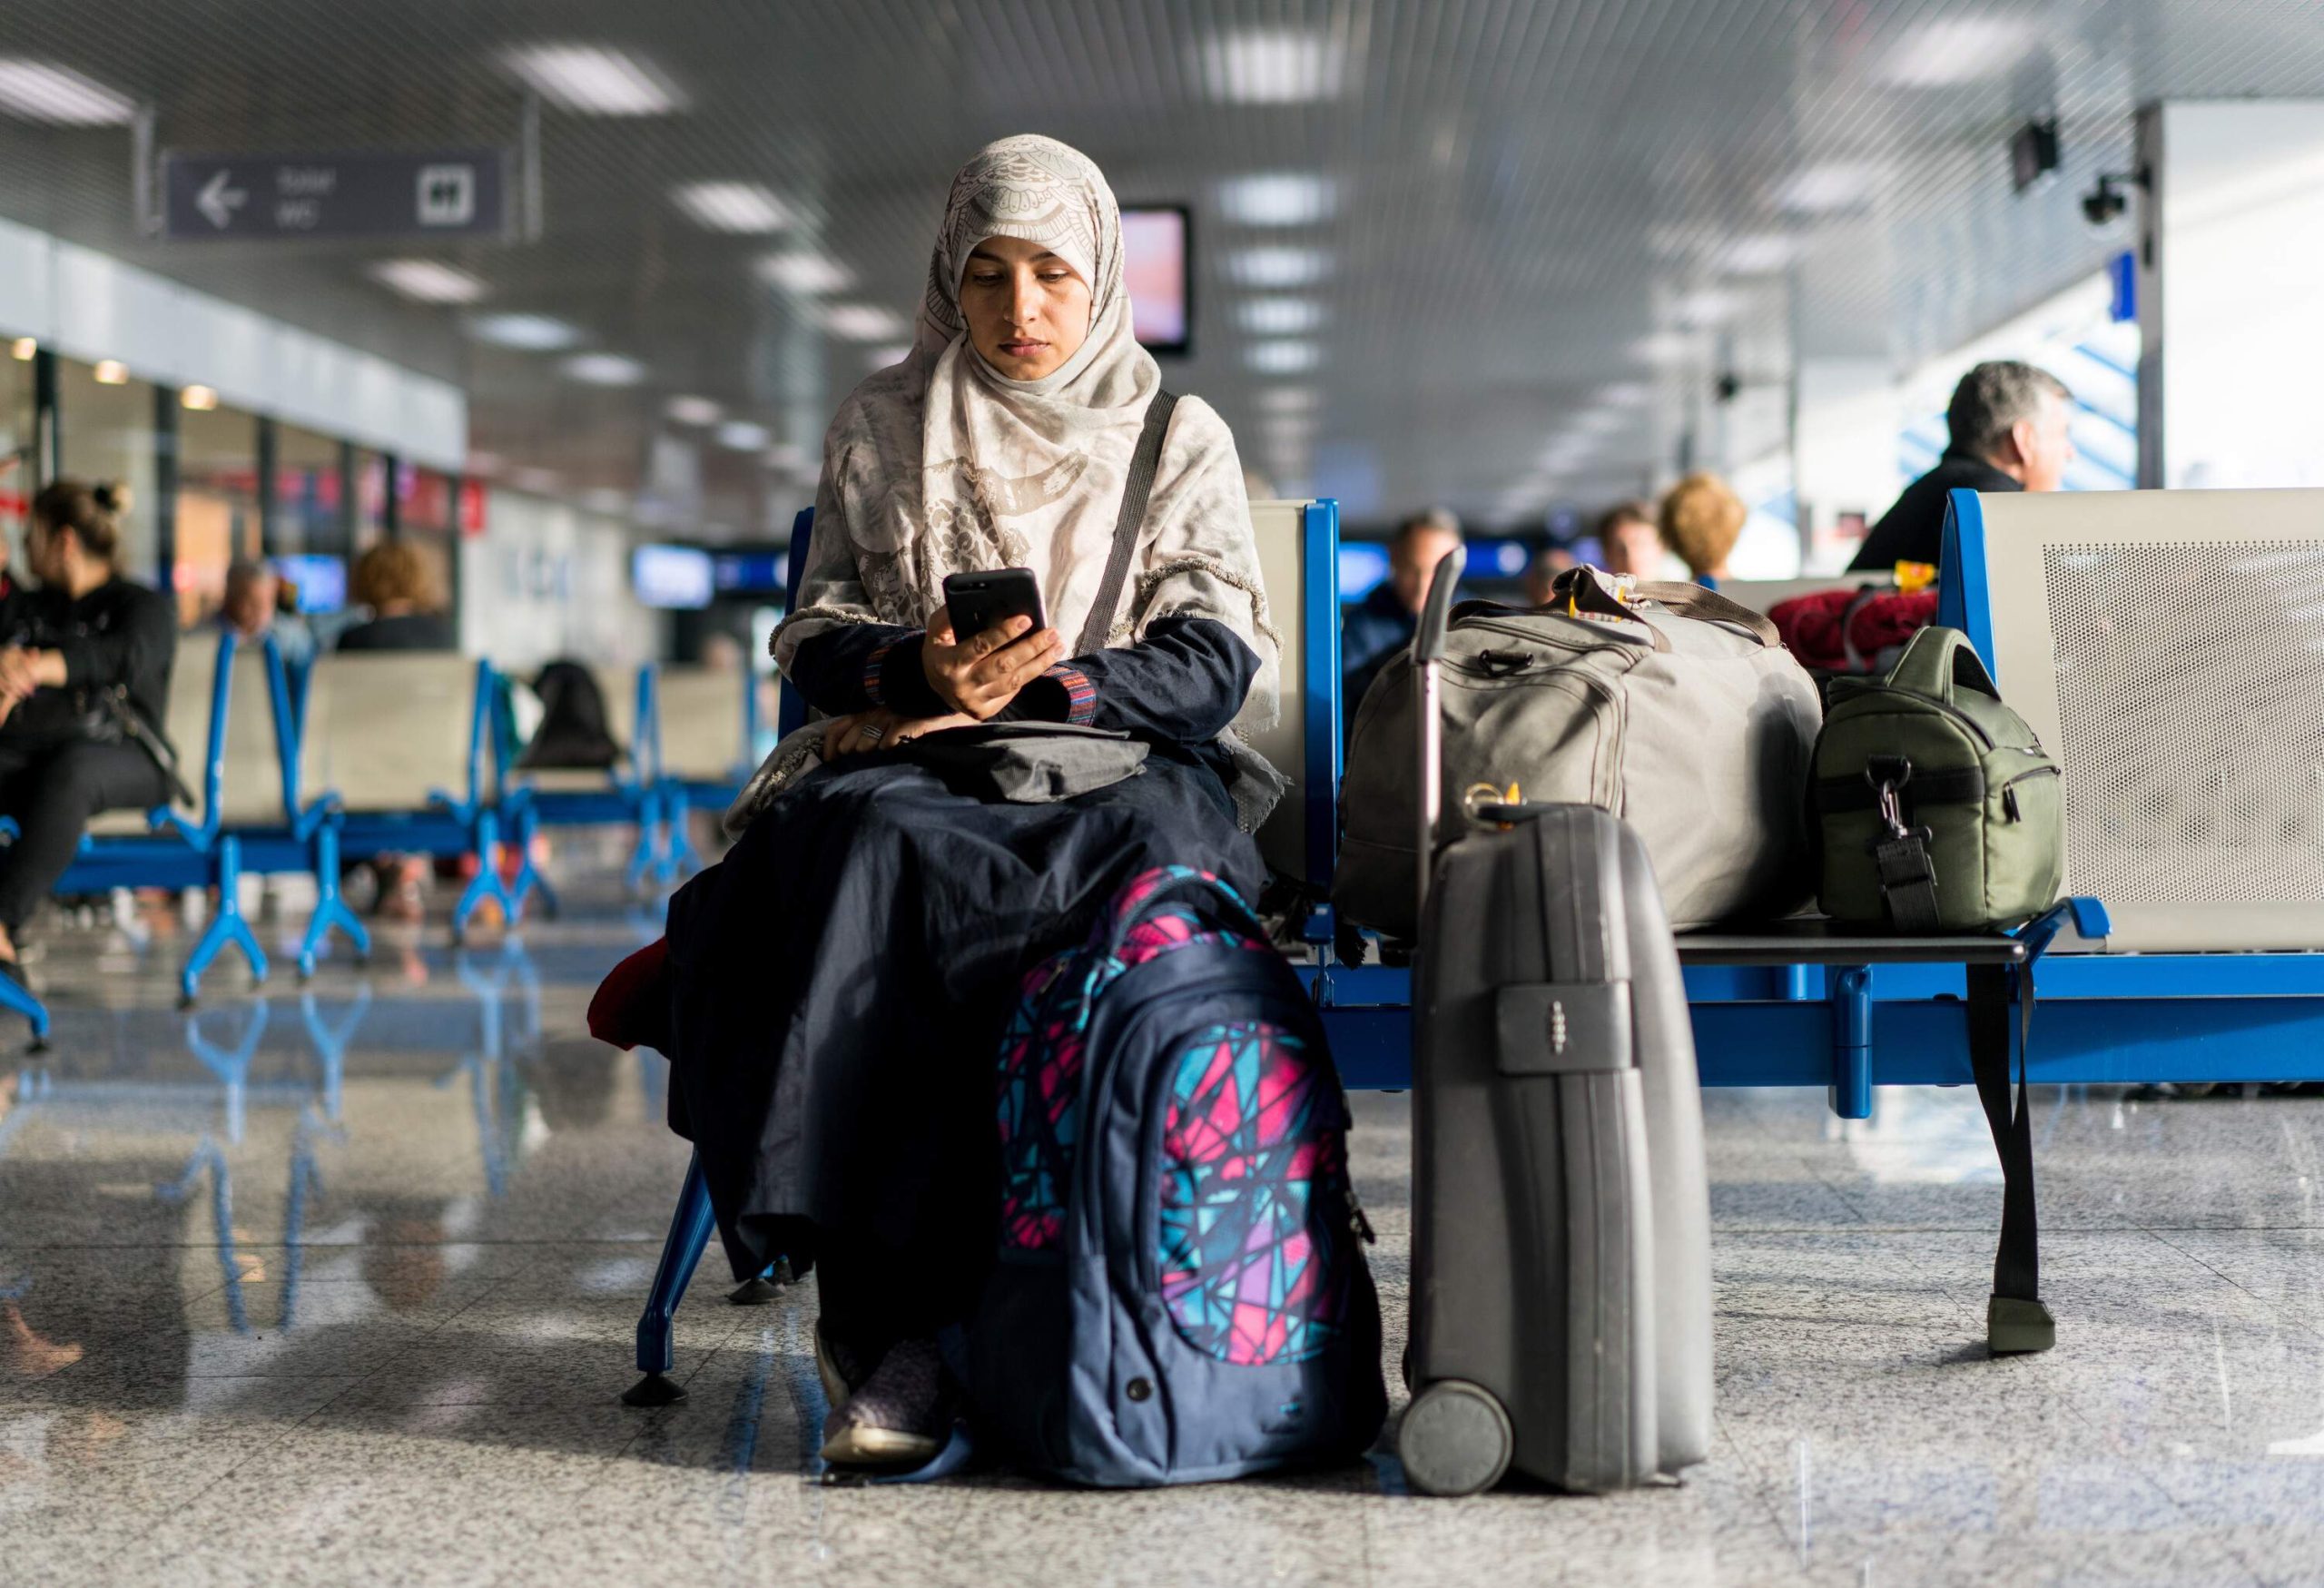 Muslim woman wearing traditional clothes sitting and waiting for her airplane flight.